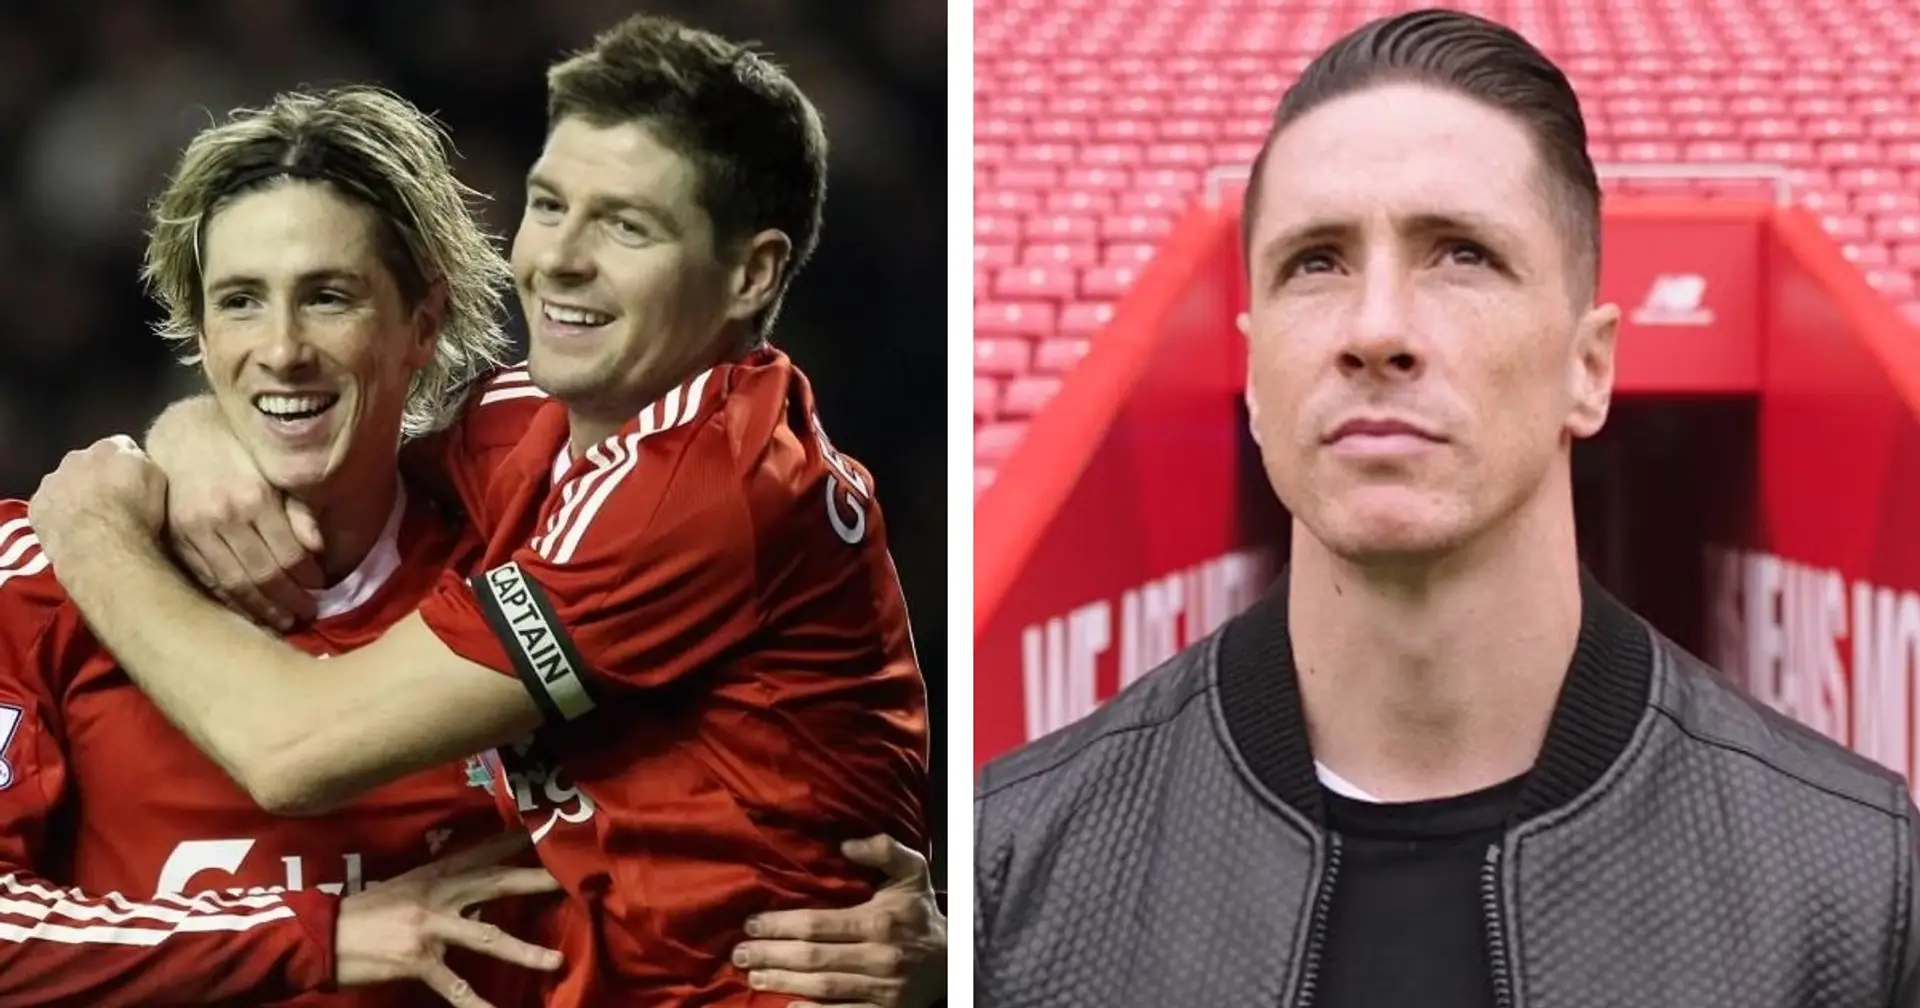 'Let's see if we still have that connection': Torres excited to play with Gerrard at Anfield again